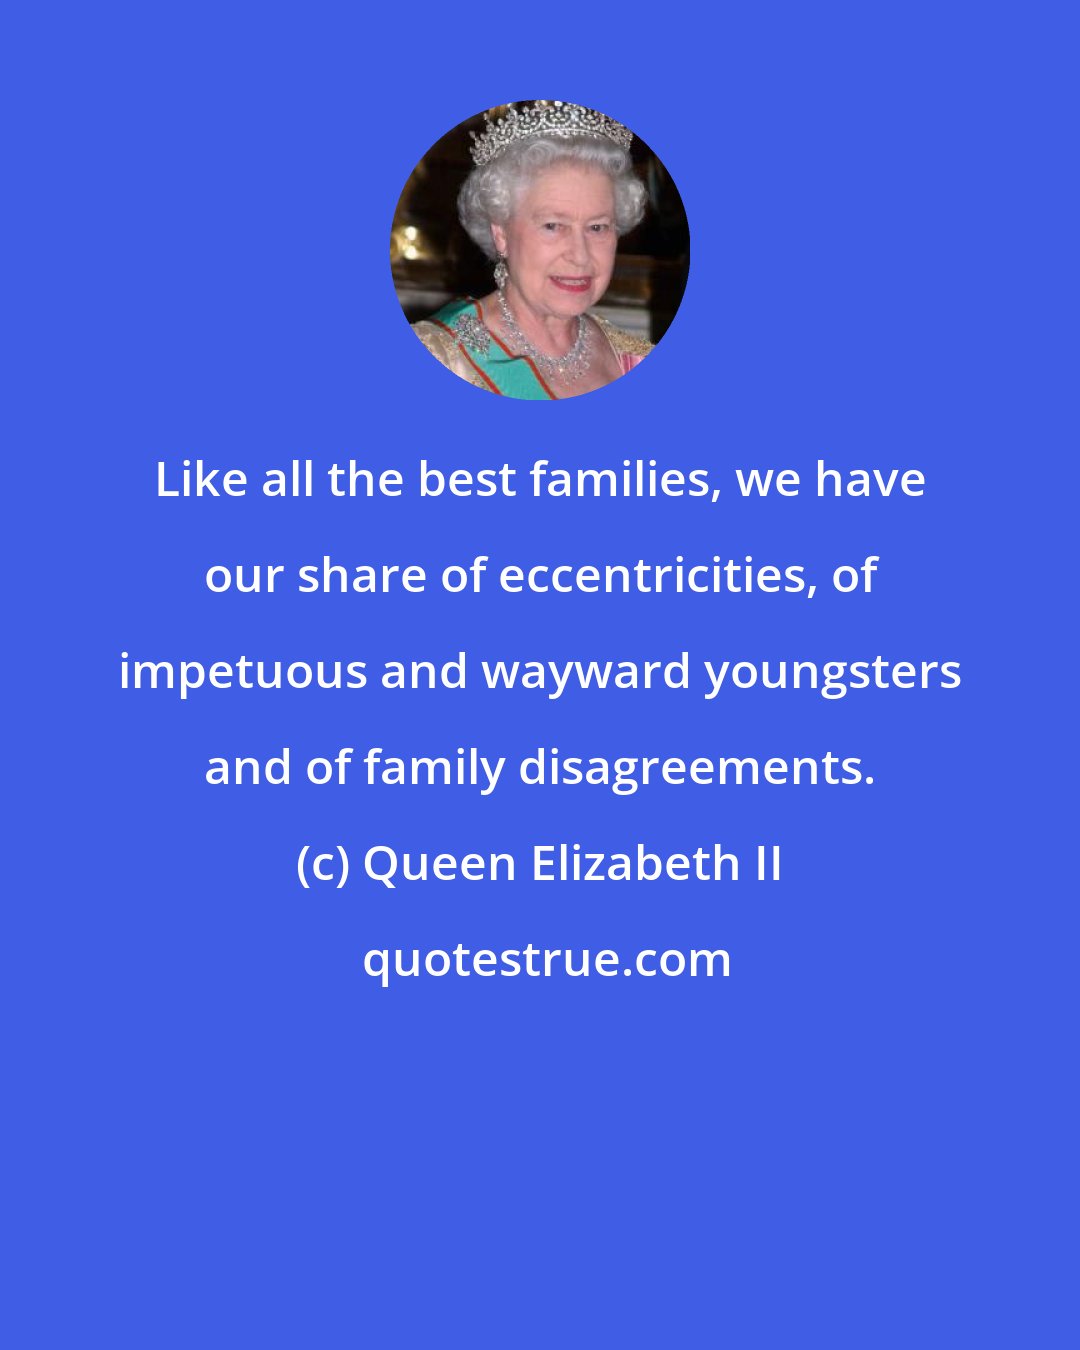 Queen Elizabeth II: Like all the best families, we have our share of eccentricities, of impetuous and wayward youngsters and of family disagreements.